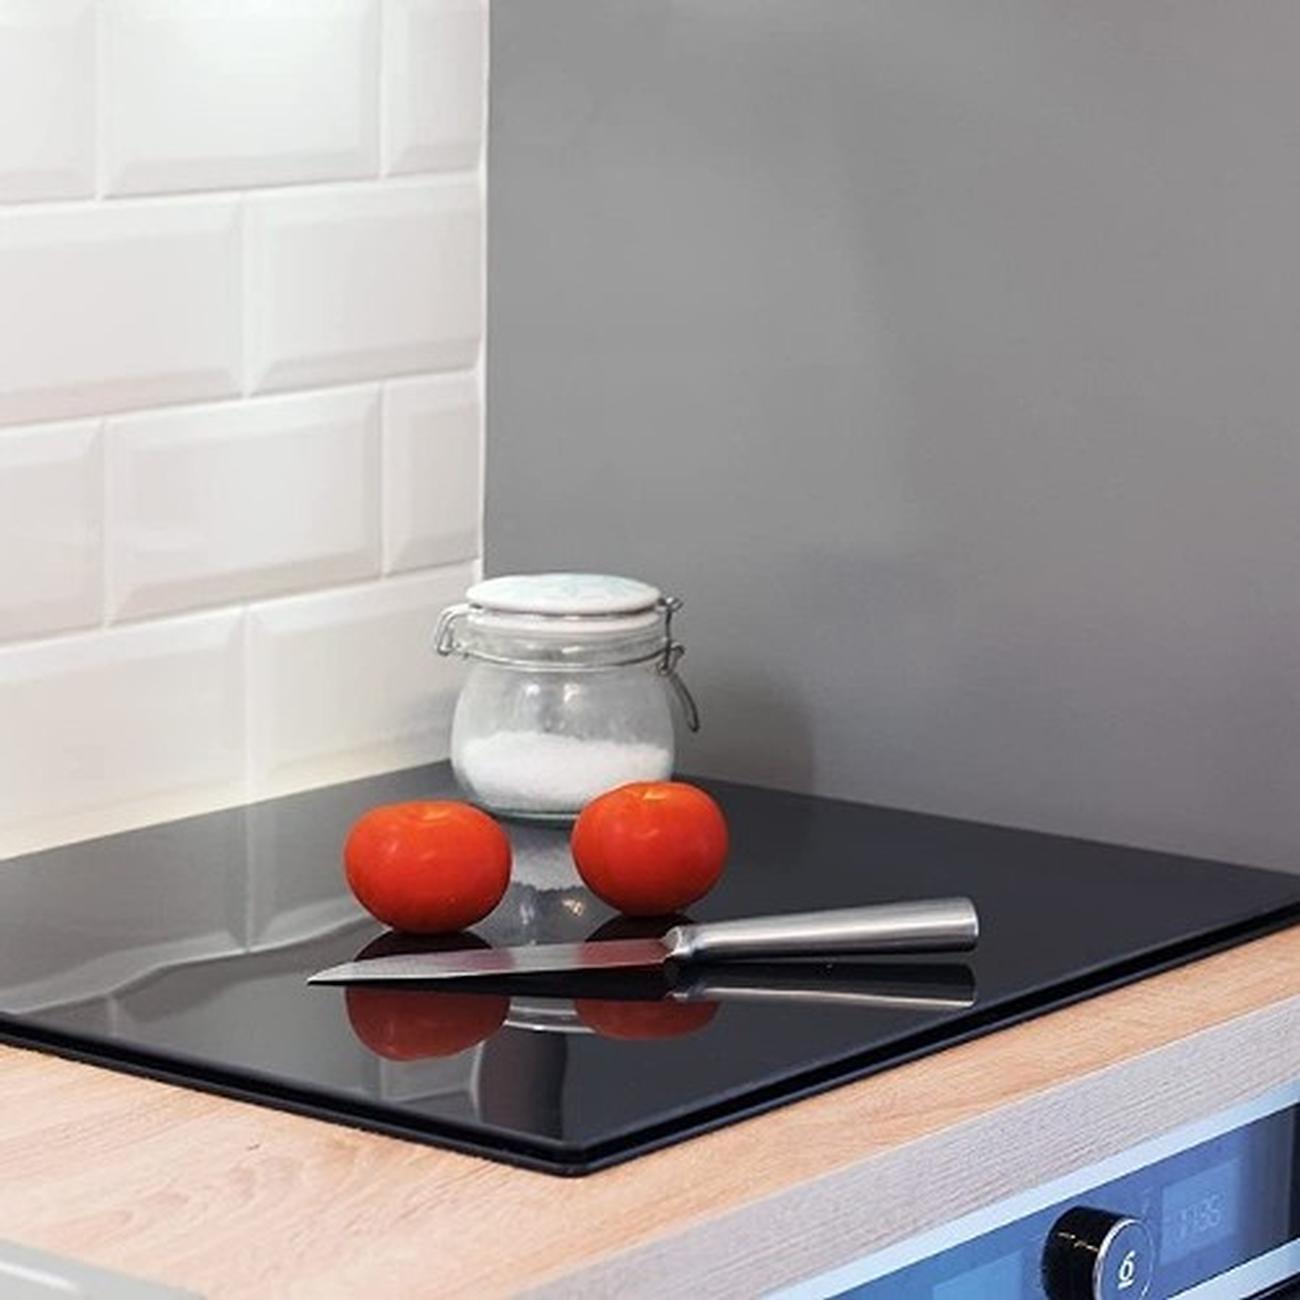 Pebbly Tempered Glass Stovetop Protector Half Size Black